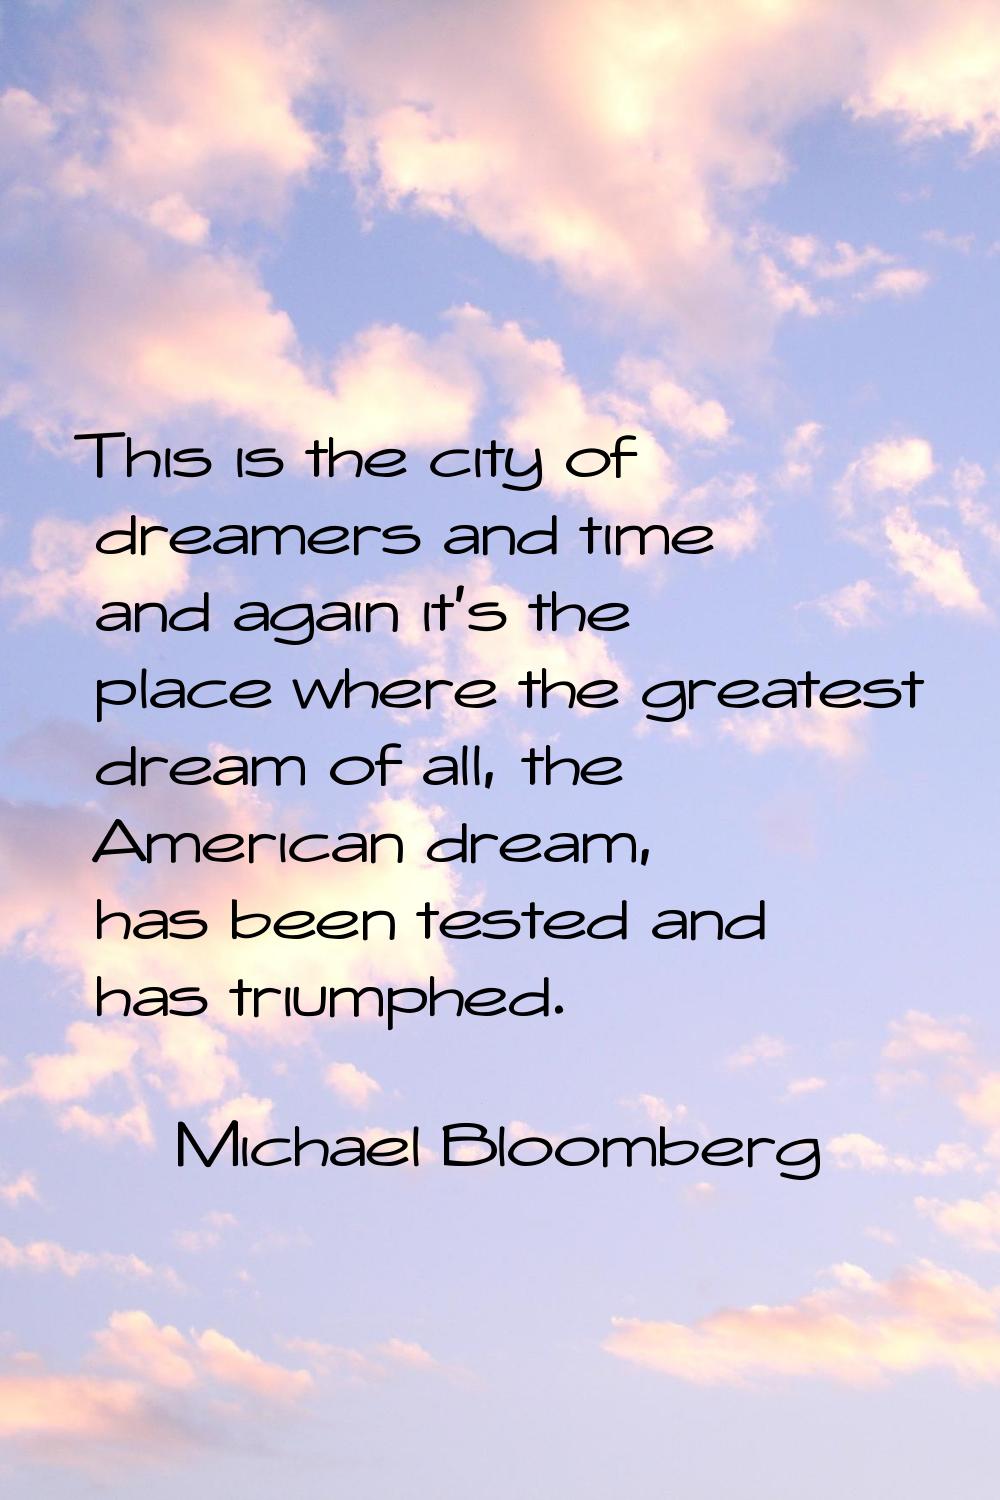 This is the city of dreamers and time and again it's the place where the greatest dream of all, the